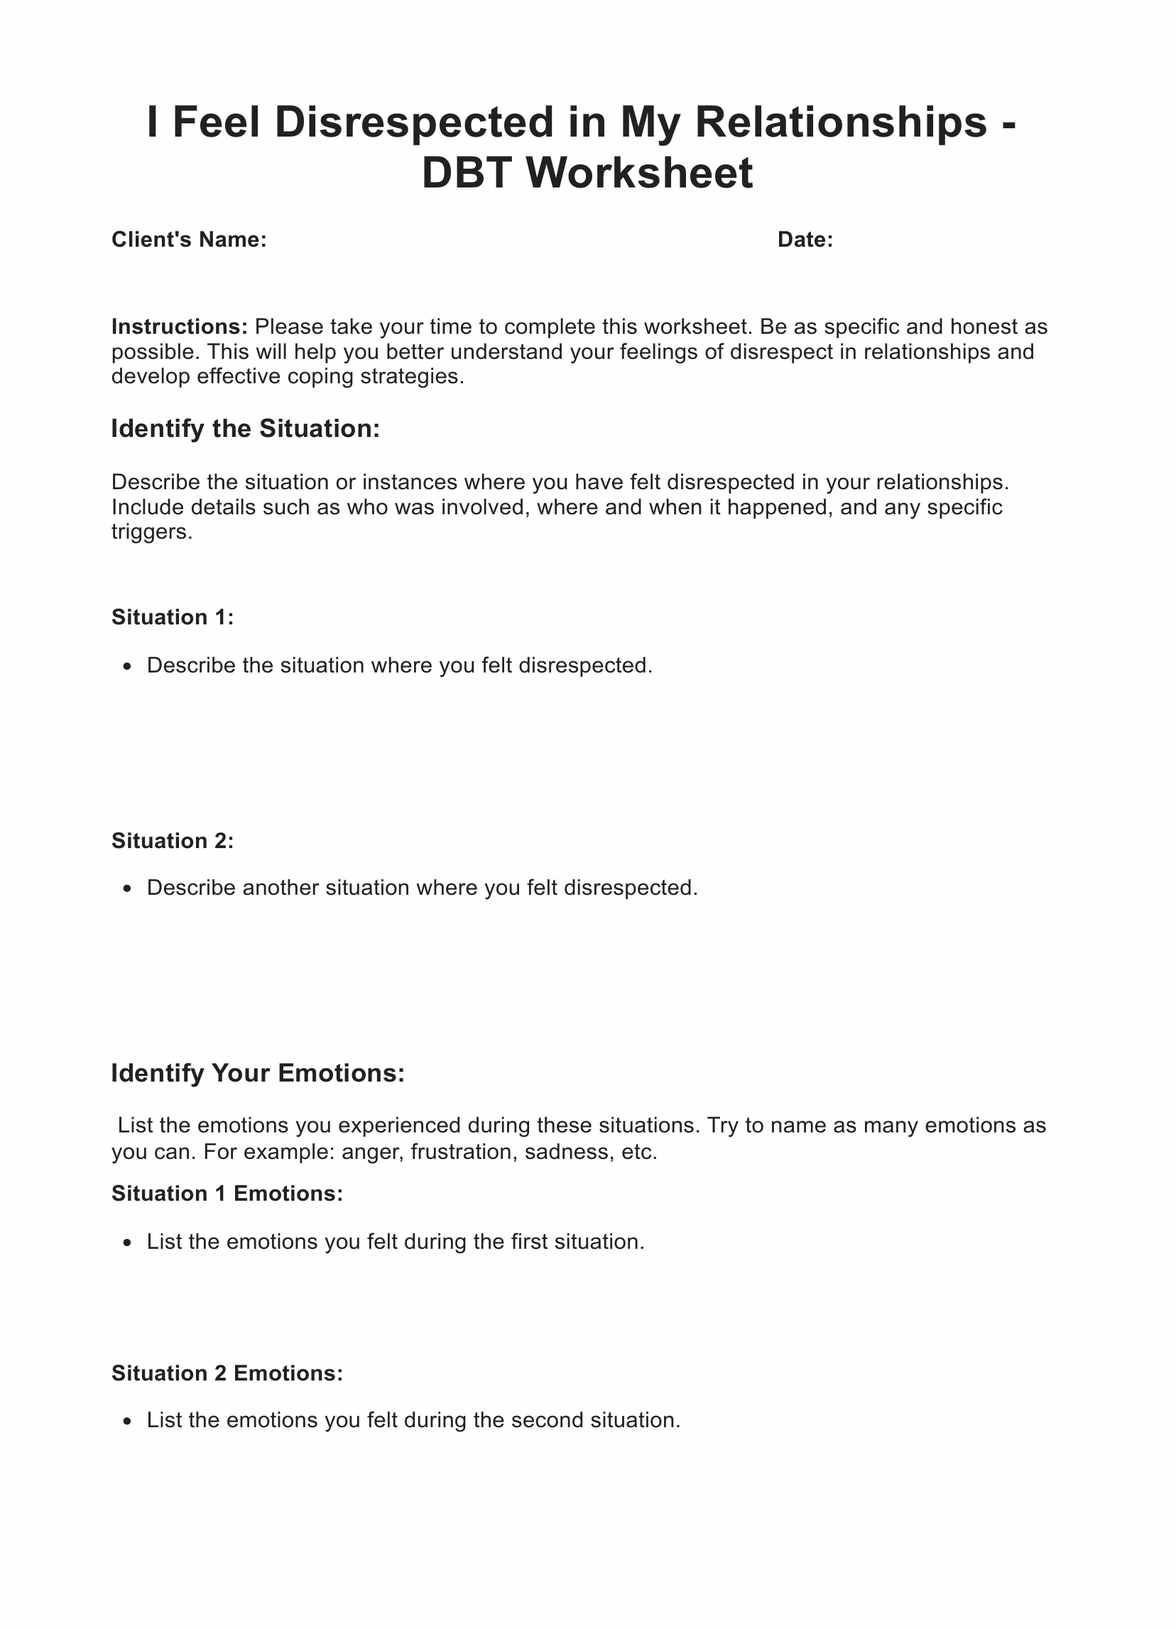 I Feel Disrespected in My Relationships DBT Worksheet PDF Example